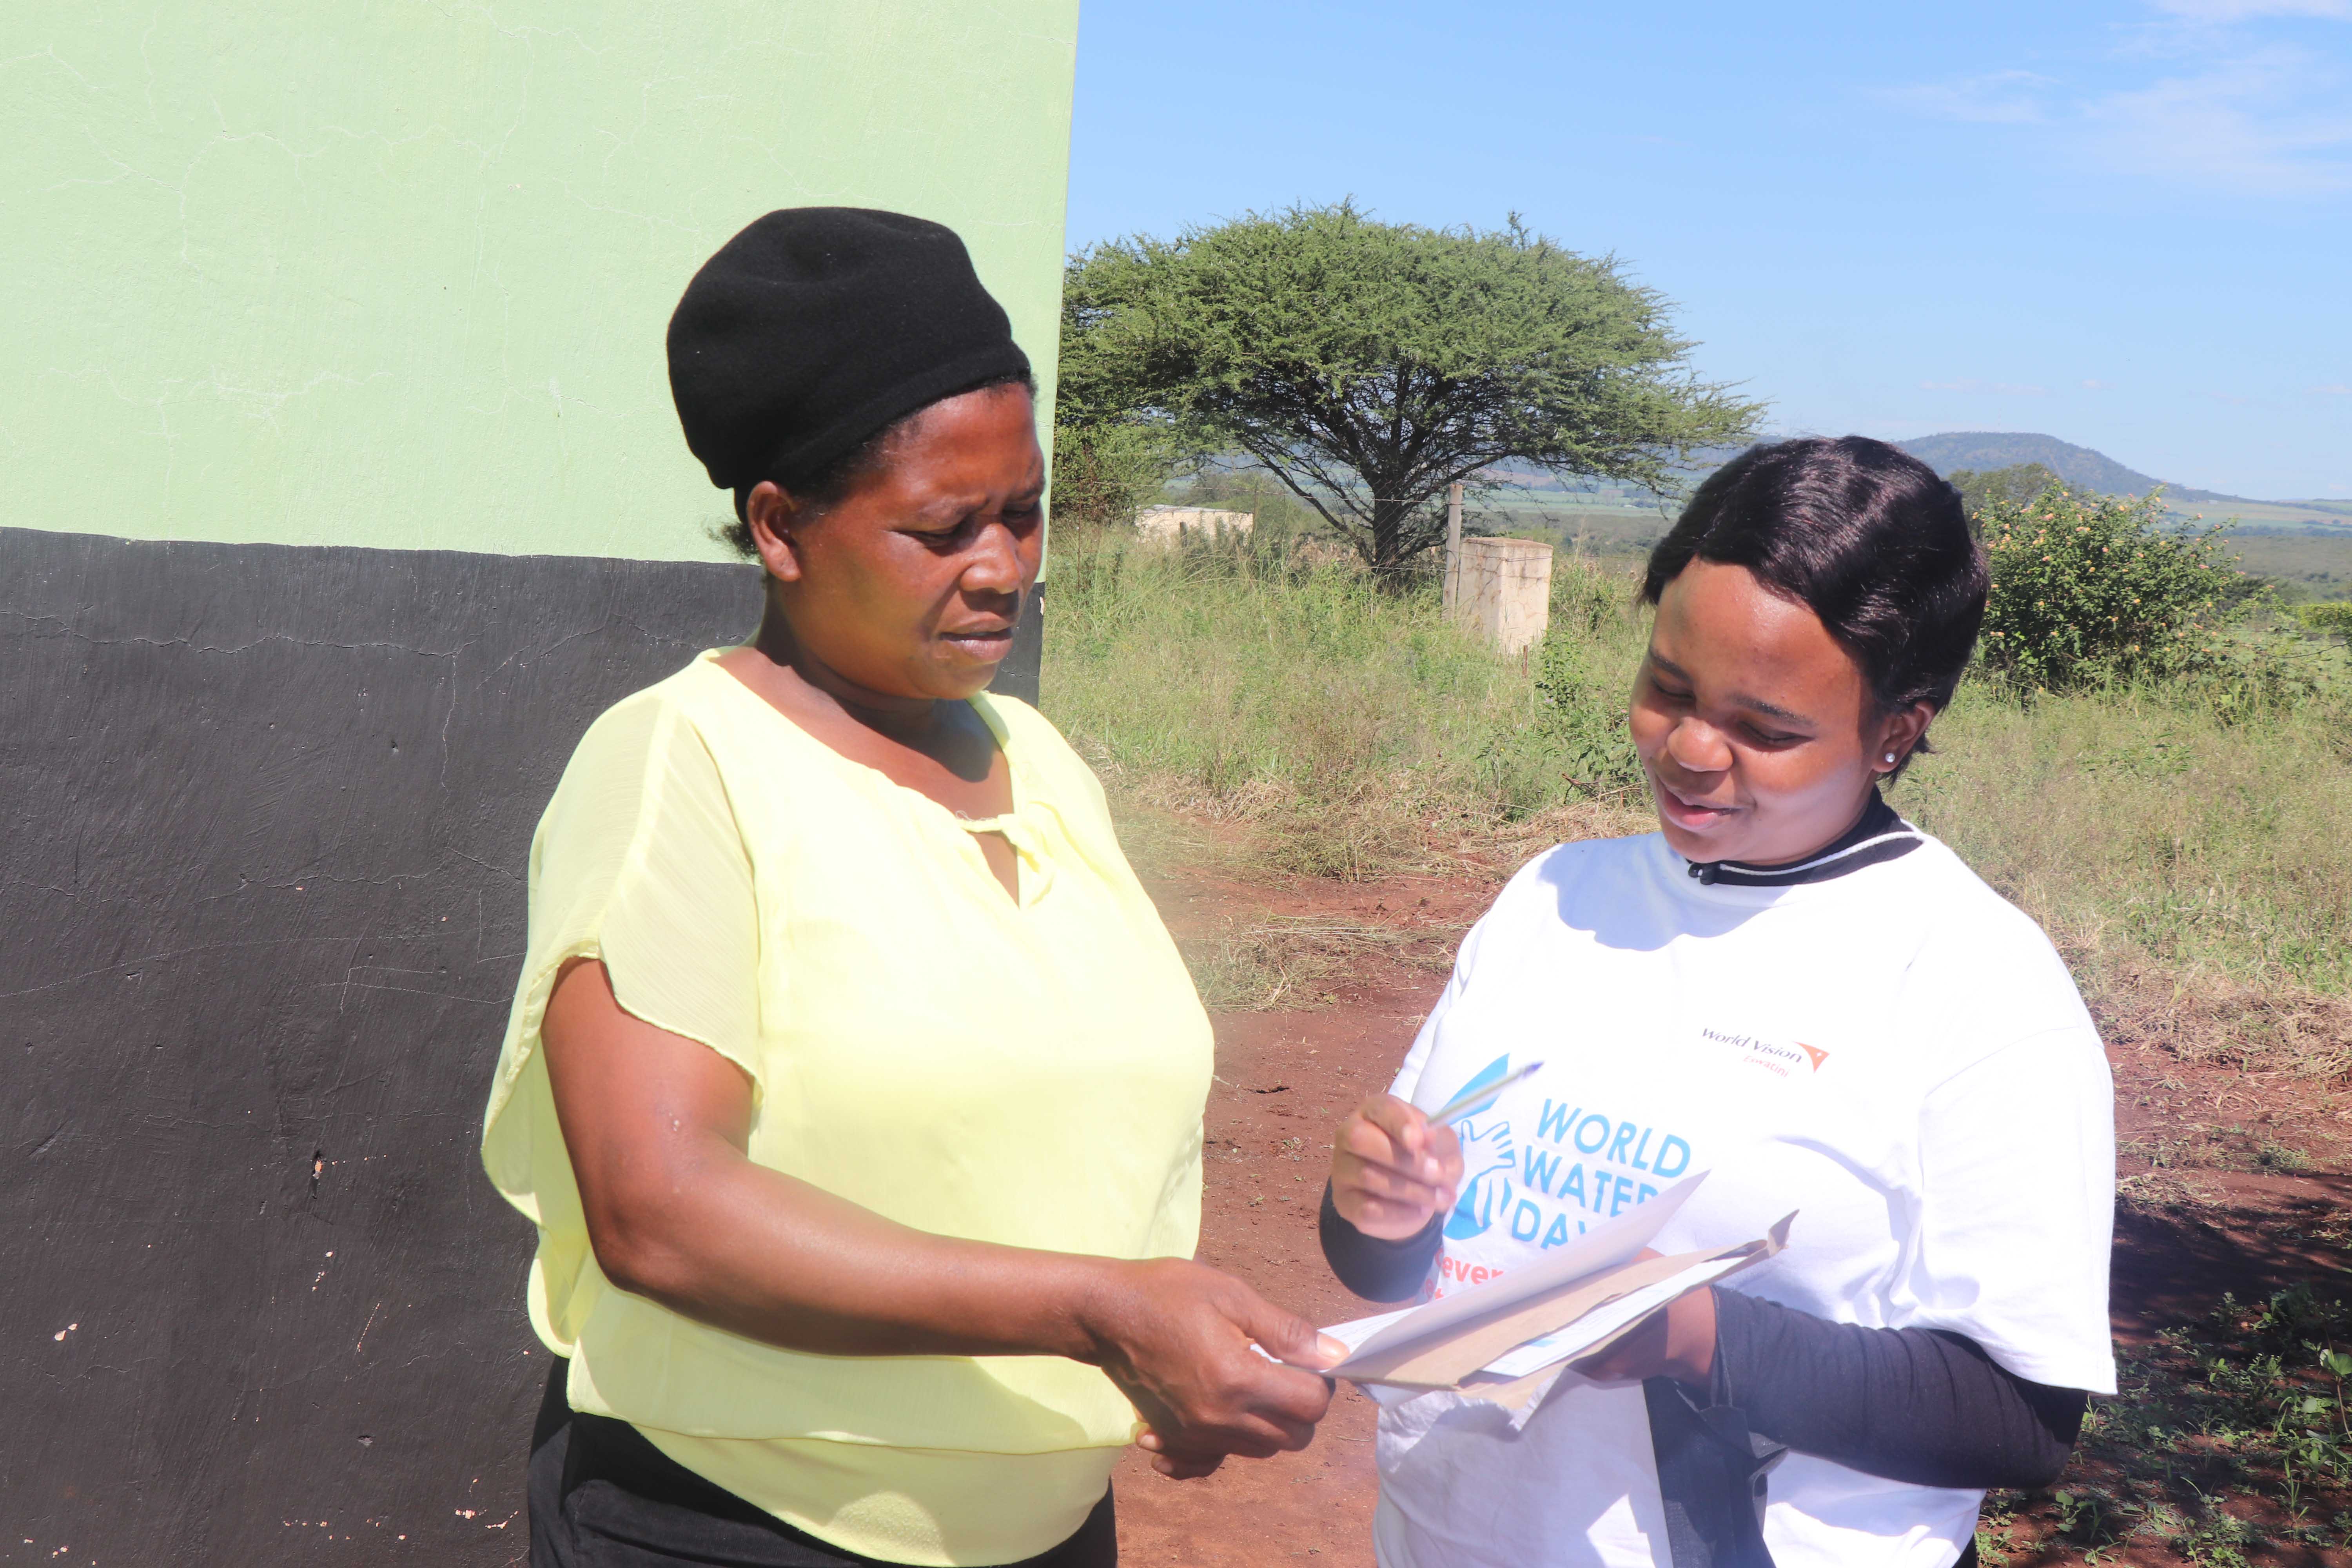 ” I WILL BE ABLE TO PROVIDE FOR MY KIDS FOR LIFE, THANKS TO THE LIFE SKILLS WORLD VISION EQUIPPED US WITH”- MASITHANDANE MULTIPURPOSE COOPERATIVE MEMBER